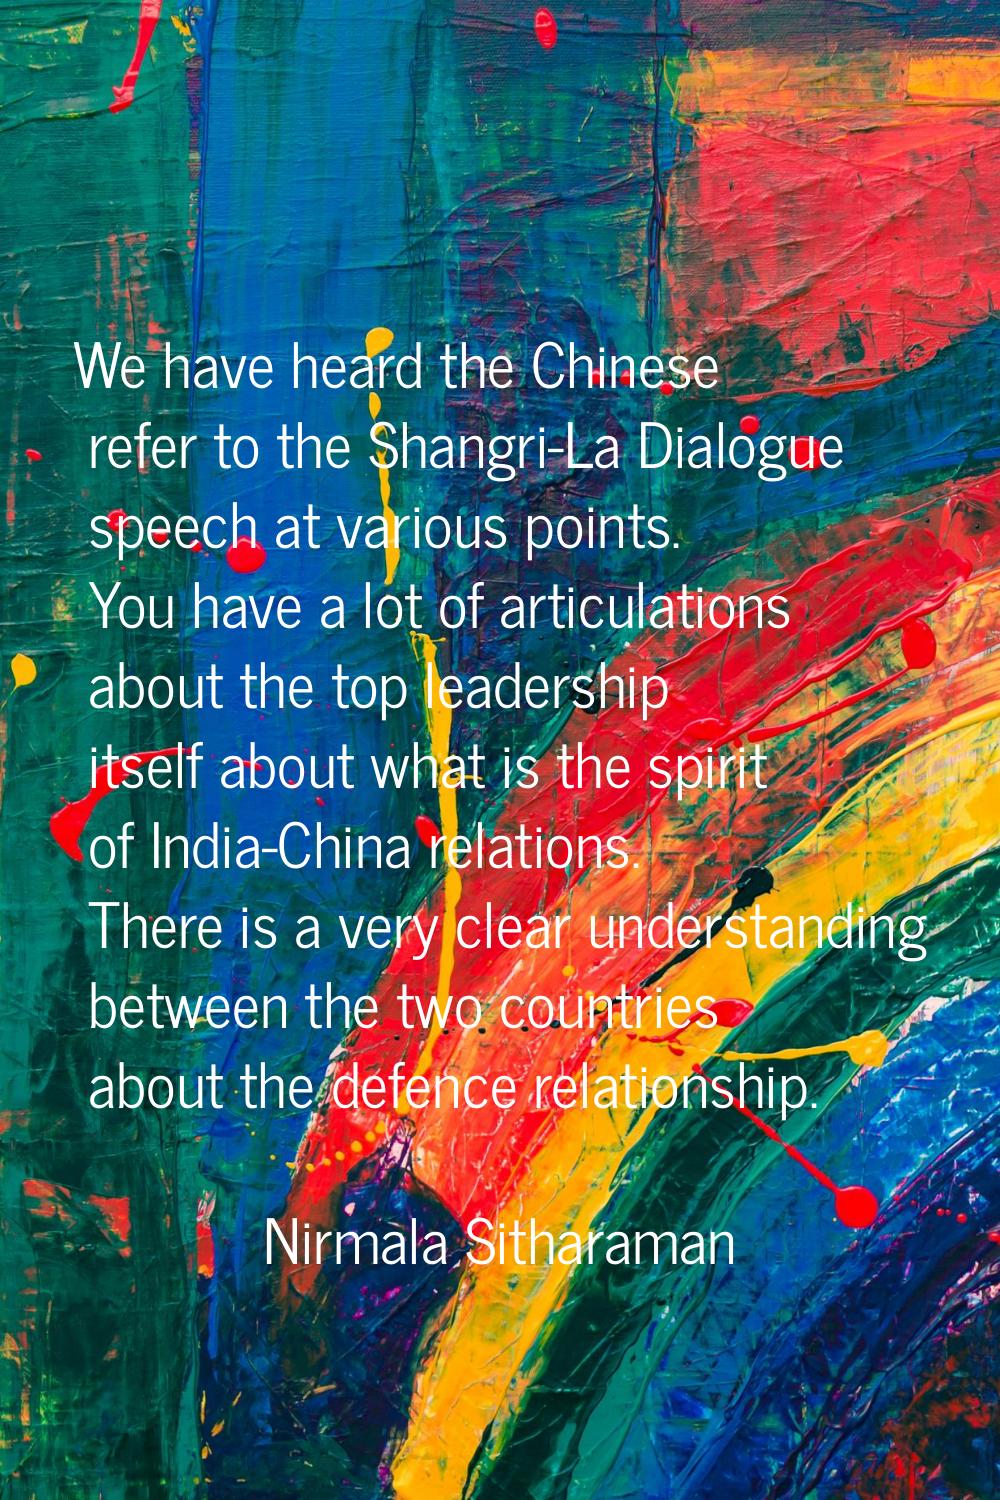 We have heard the Chinese refer to the Shangri-La Dialogue speech at various points. You have a lot